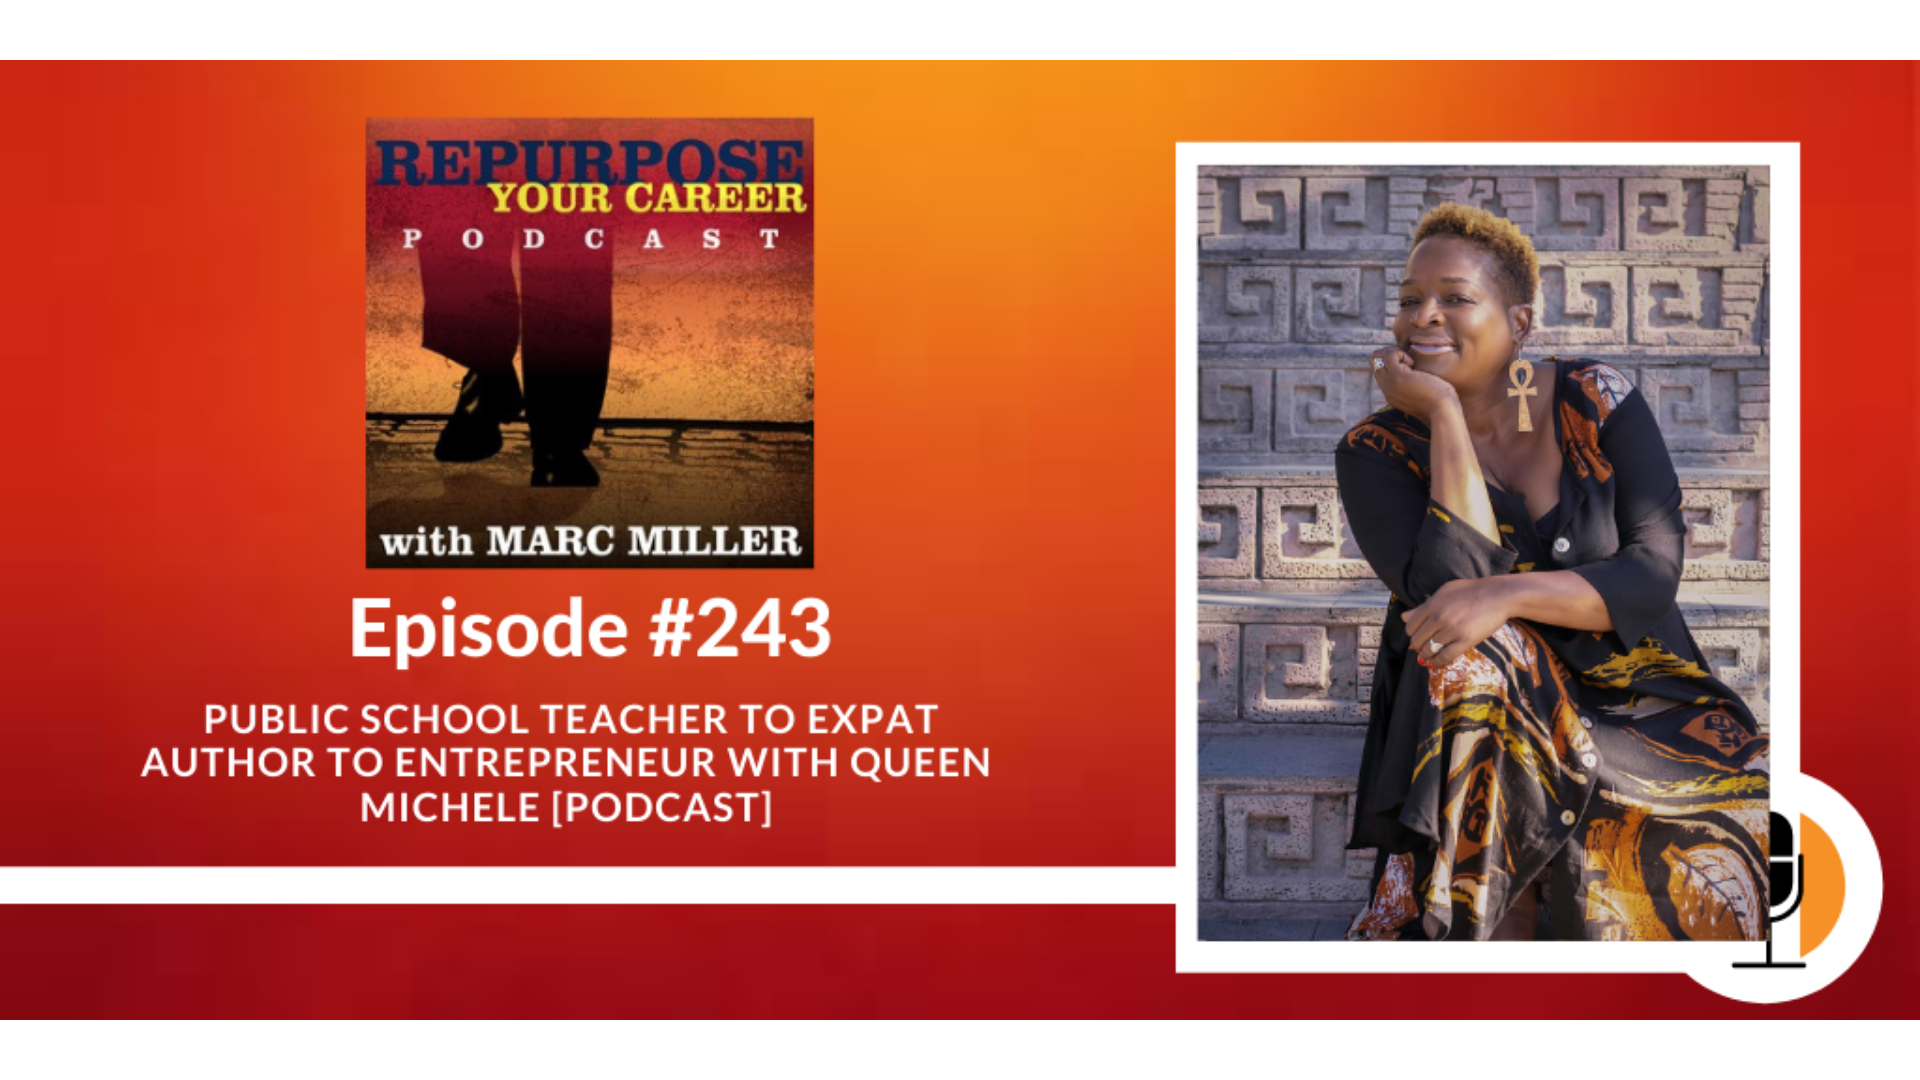 A teacher in a public residential school connects to an entrepreneur with Queen Michelle [Podcast]